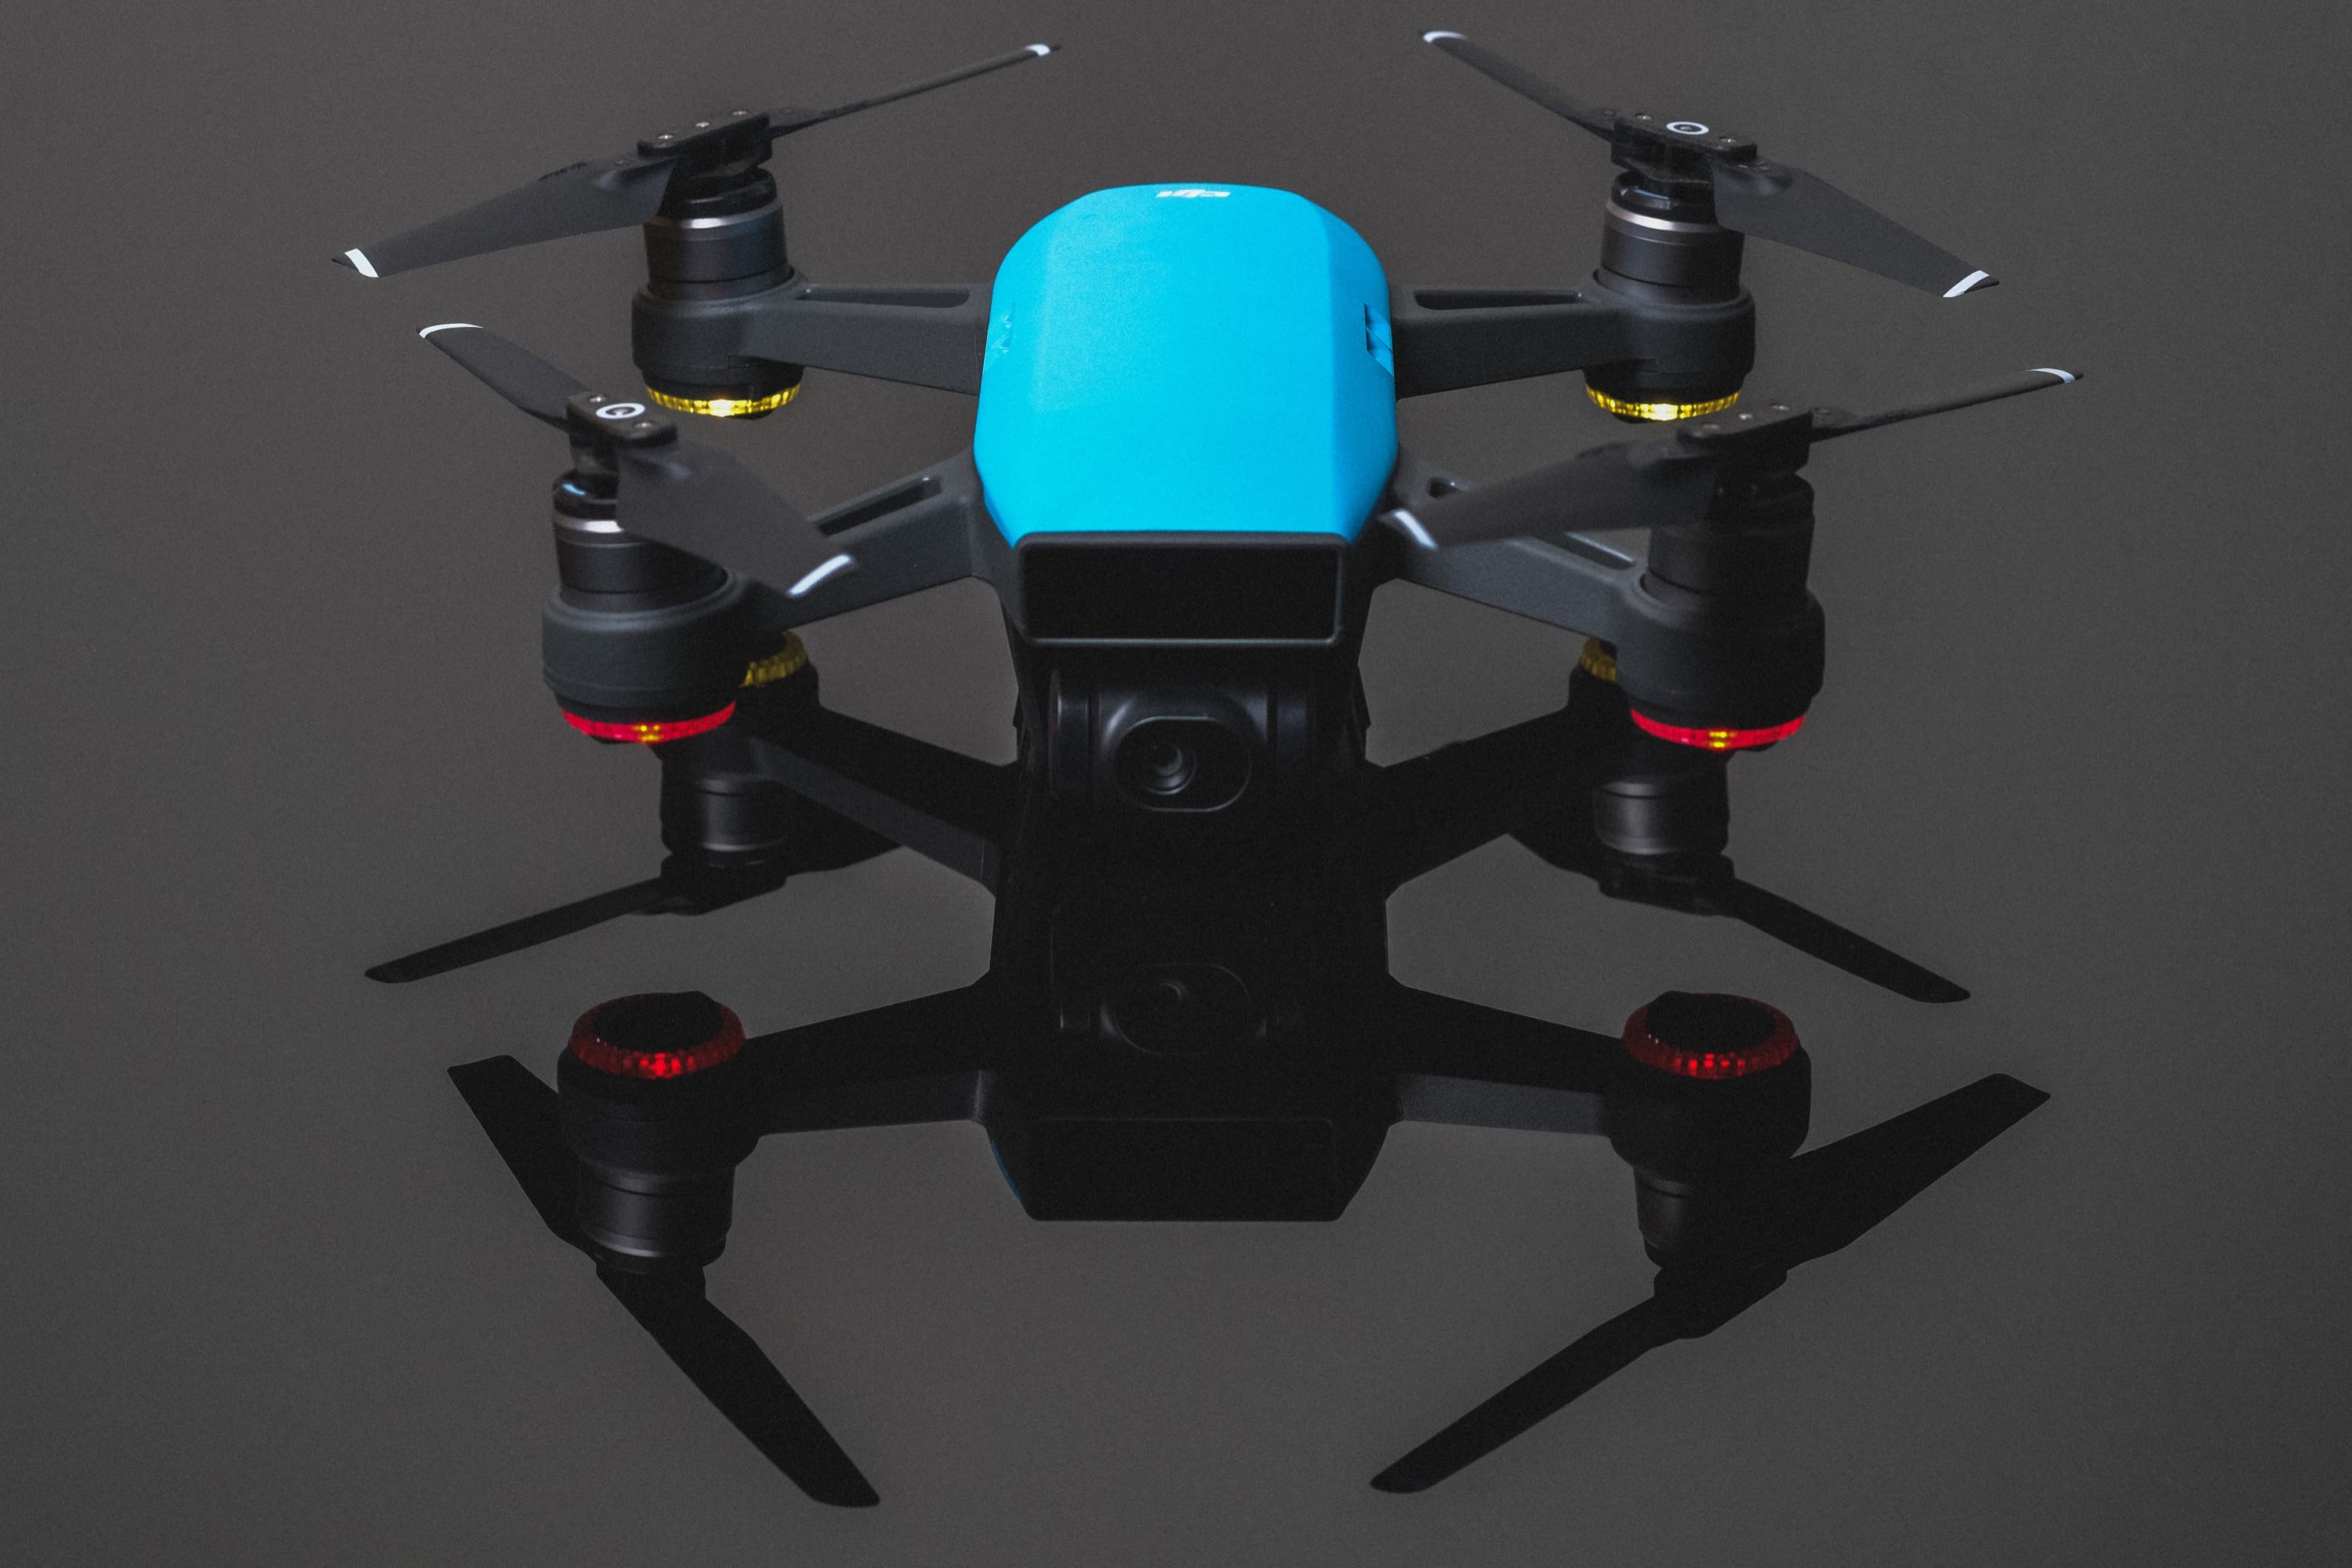 Best Accessories For The DJI Spark